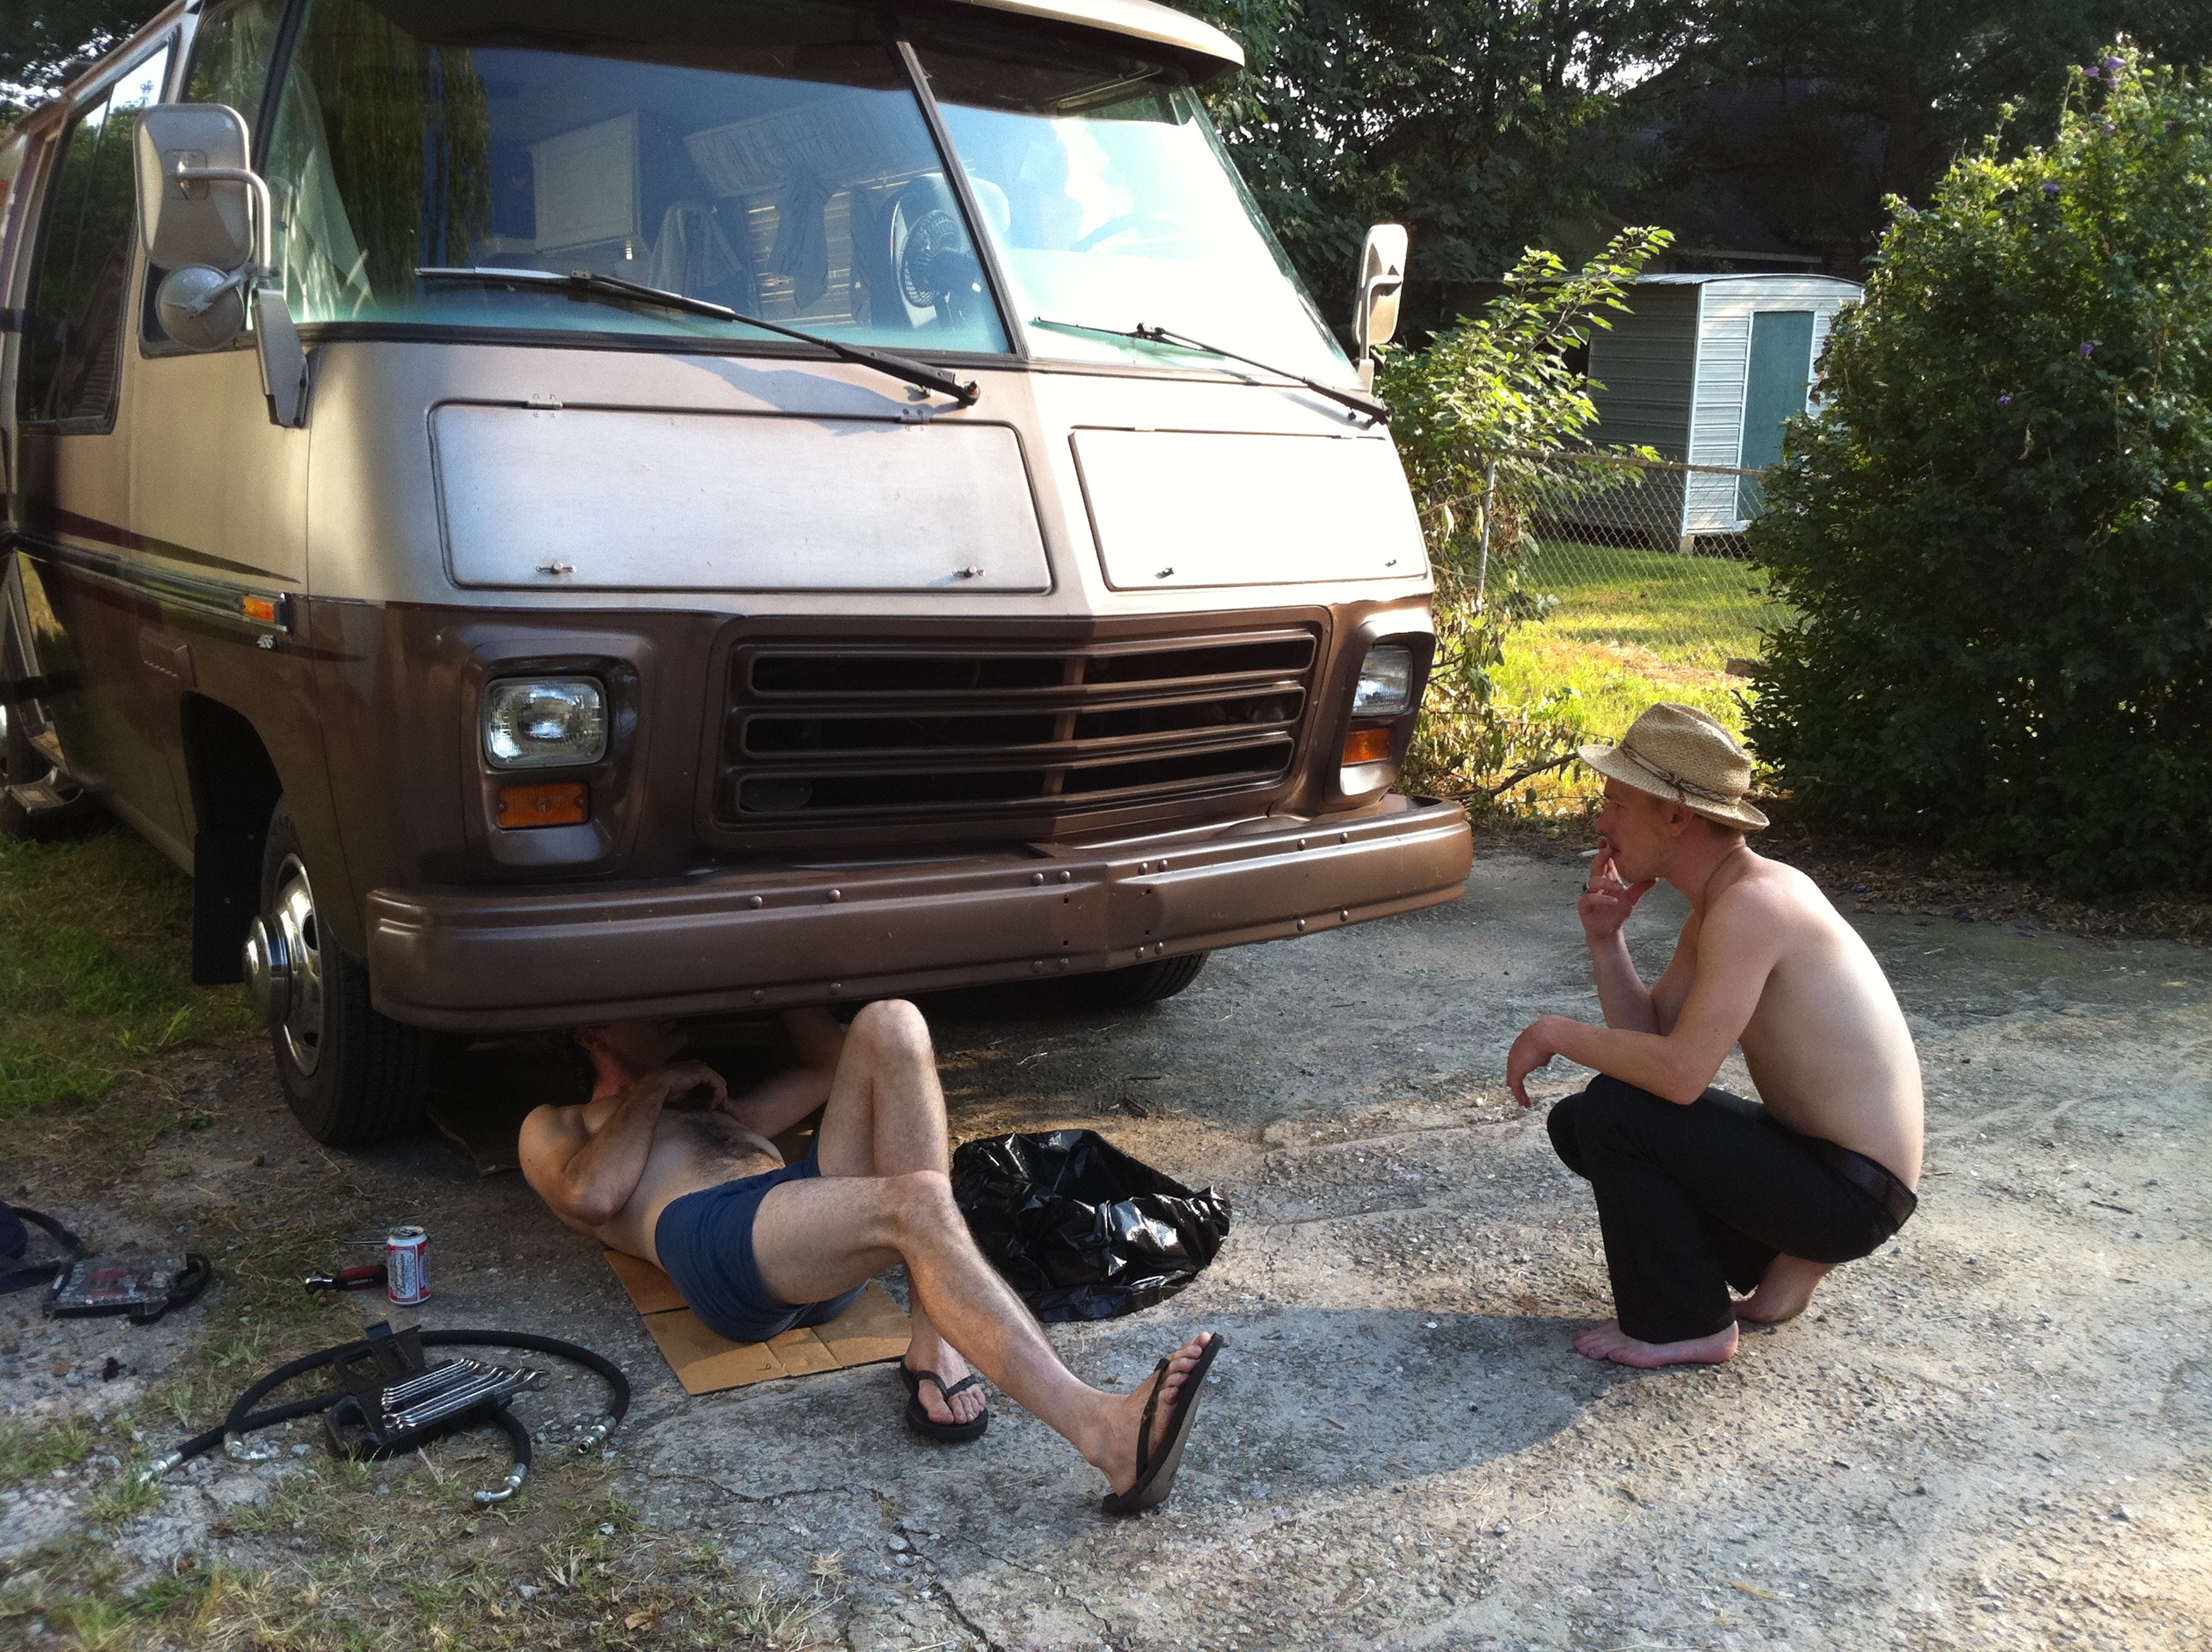 One of the many break-downs we experienced in Blood Feathers' touring RV. August 2010.